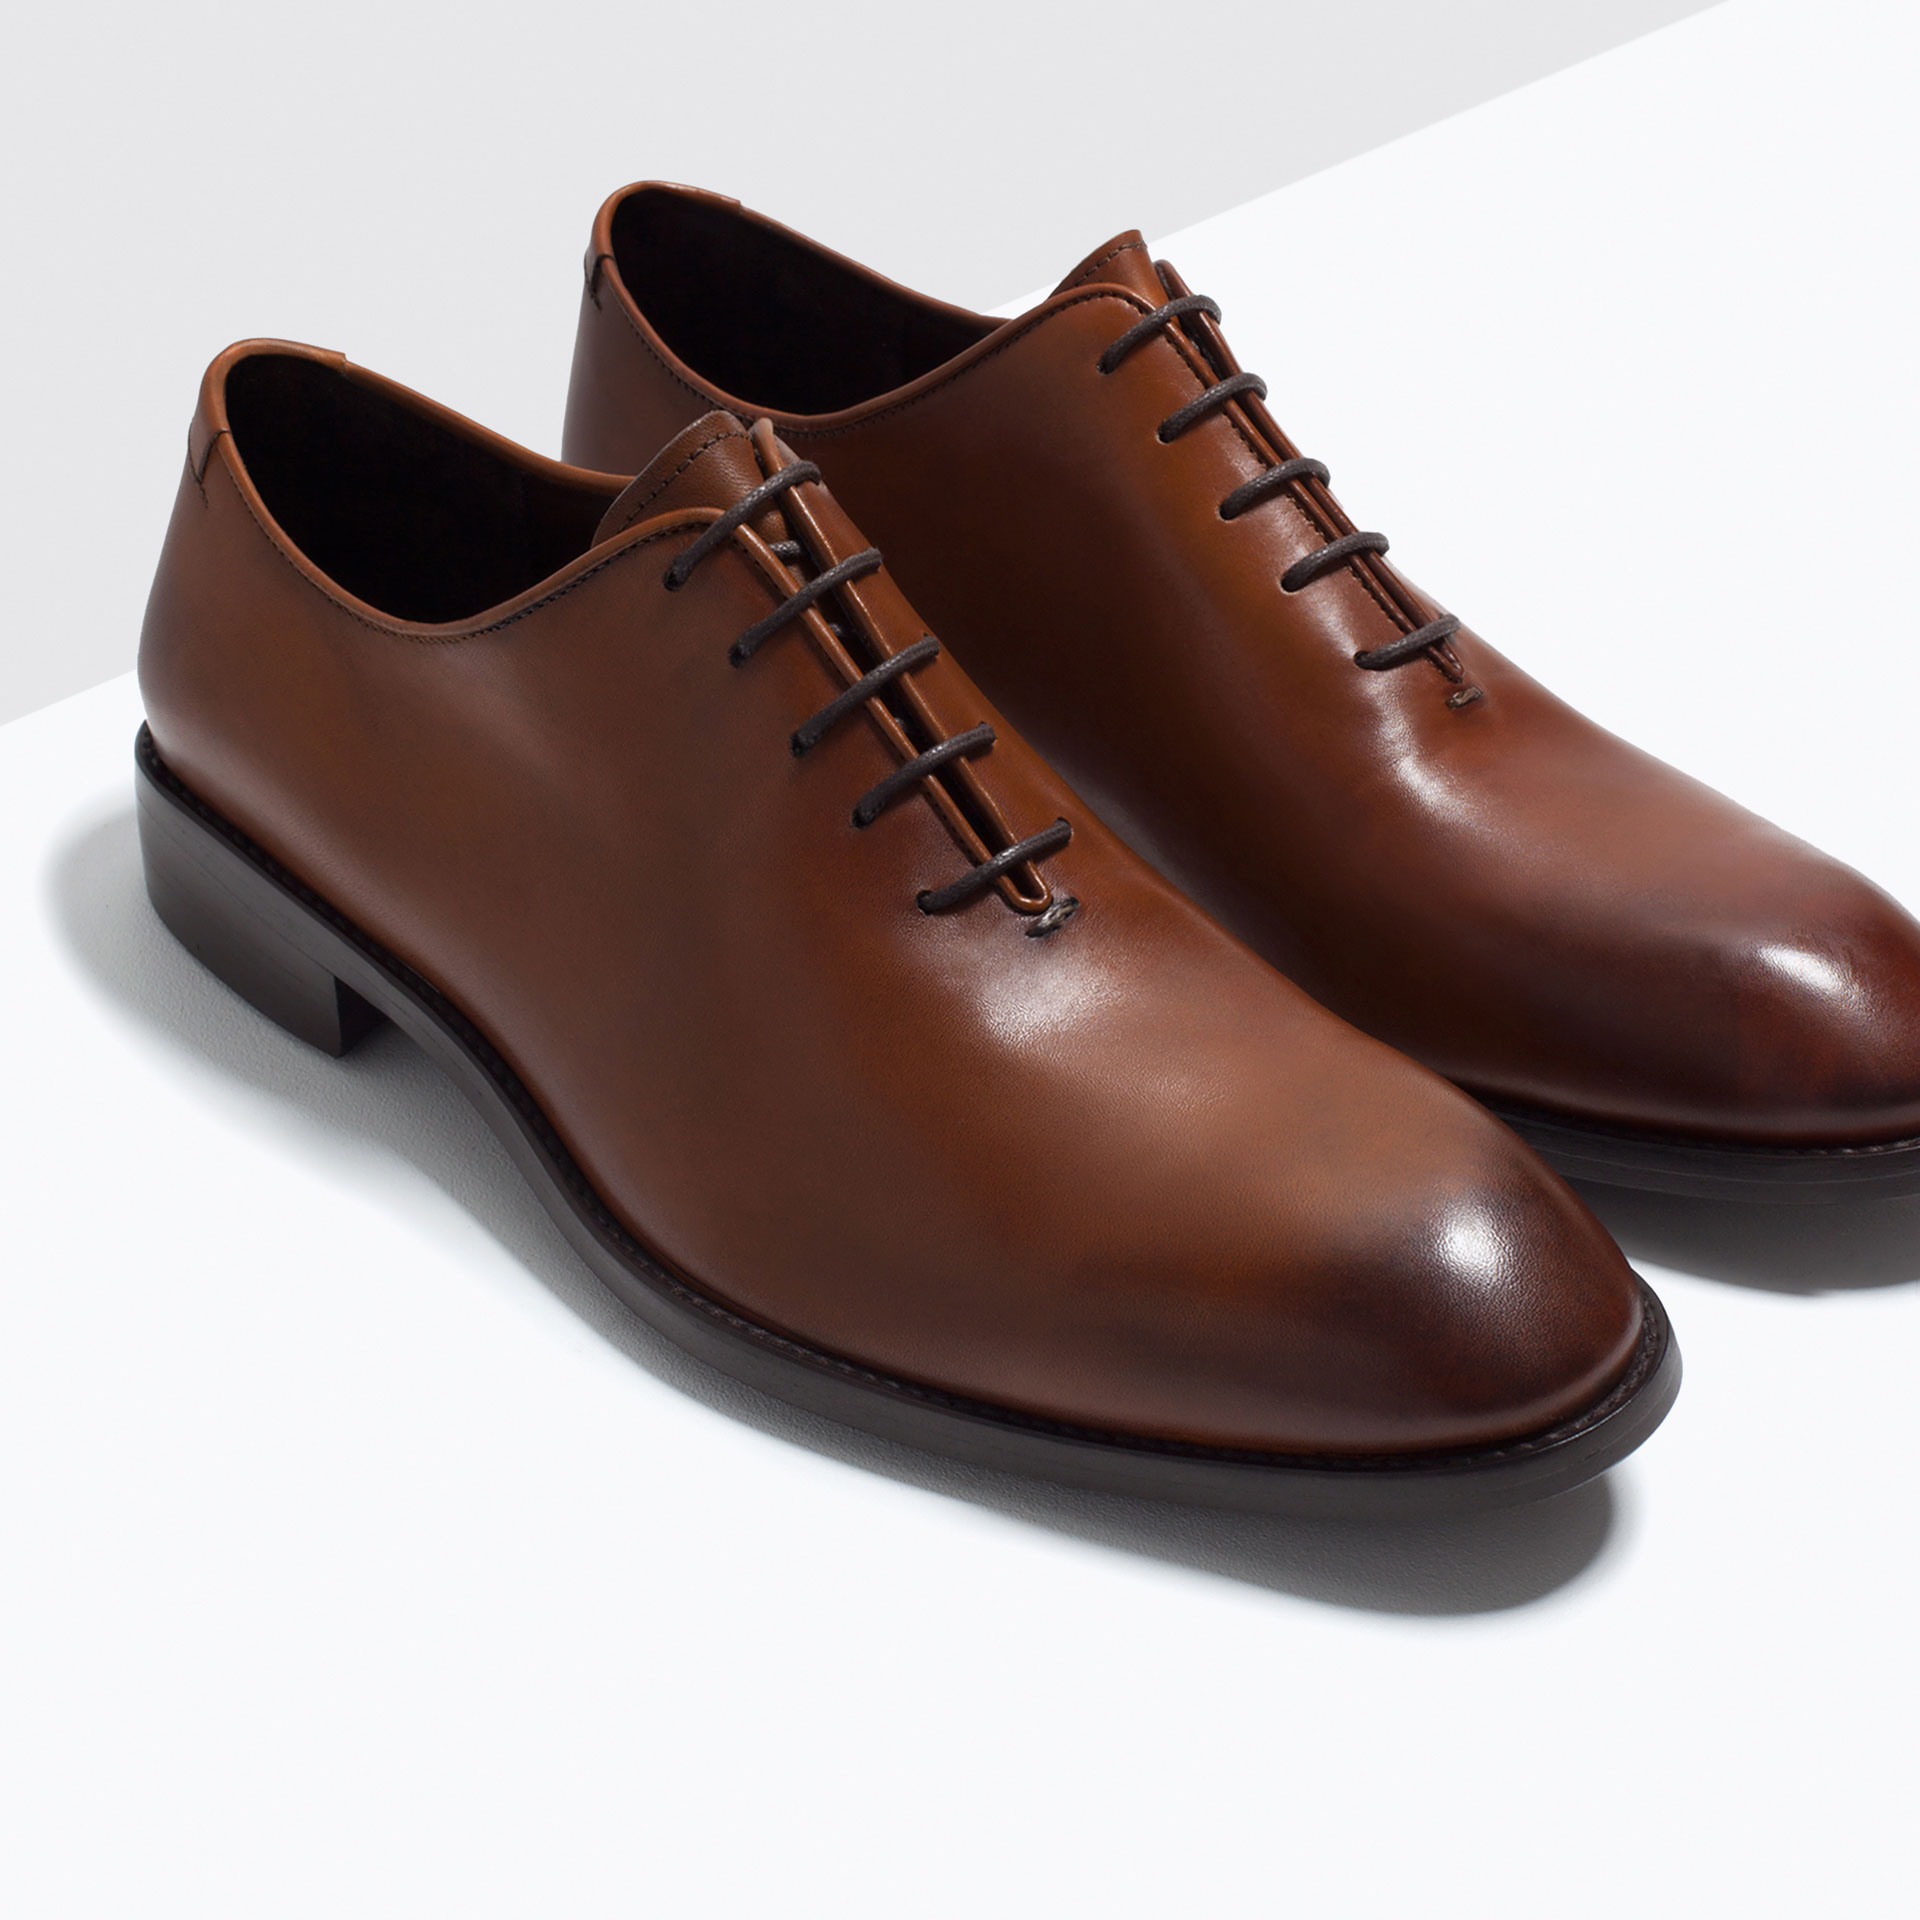  Zara  One Piece Leather Shoes  in Brown for Men  Lyst